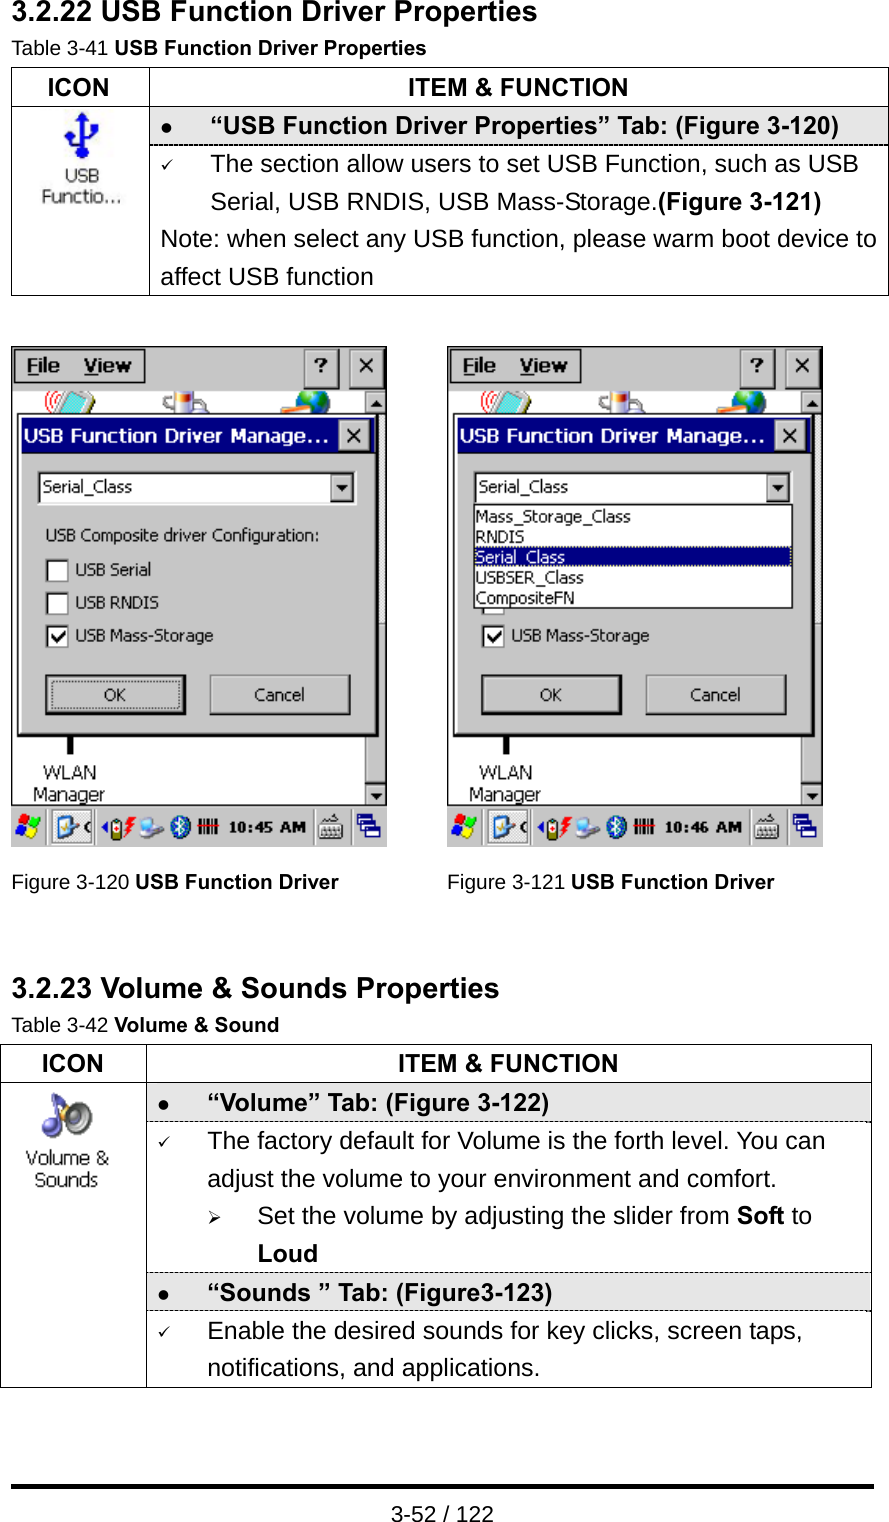  3-52 / 122 3.2.22 USB Function Driver Properties Table 3-41 USB Function Driver Properties   ICON  ITEM &amp; FUNCTION z “USB Function Driver Properties” Tab: (Figure 3-120)  9 The section allow users to set USB Function, such as USB Serial, USB RNDIS, USB Mass-Storage.(Figure 3-121) Note: when select any USB function, please warm boot device toaffect USB function     Figure 3-120 USB Function Driver Figure 3-121 USB Function Driver   3.2.23 Volume &amp; Sounds Properties Table 3-42 Volume &amp; Sound ICON  ITEM &amp; FUNCTION z “Volume” Tab: (Figure 3-122) 9 The factory default for Volume is the forth level. You can adjust the volume to your environment and comfort.   ¾ Set the volume by adjusting the slider from Soft to Loud z “Sounds ” Tab: (Figure3-123)  9 Enable the desired sounds for key clicks, screen taps, notifications, and applications.  